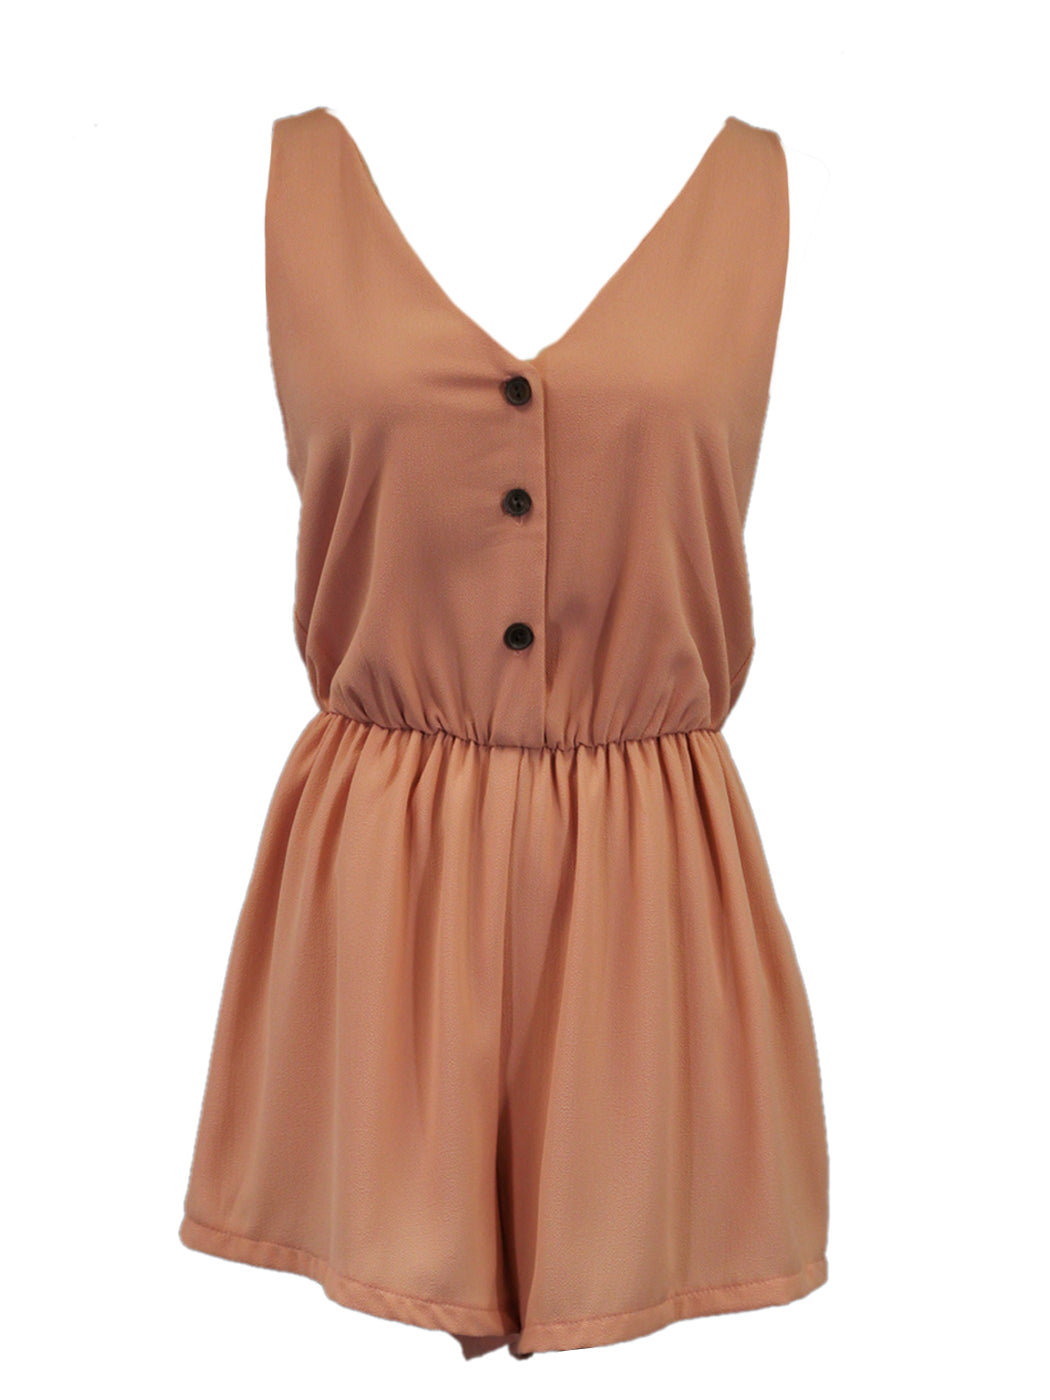 Audrey 3+1 Button Down V Neckline Romper With Cinched Elastic Waist Loose Bottom - ALILANG.COM